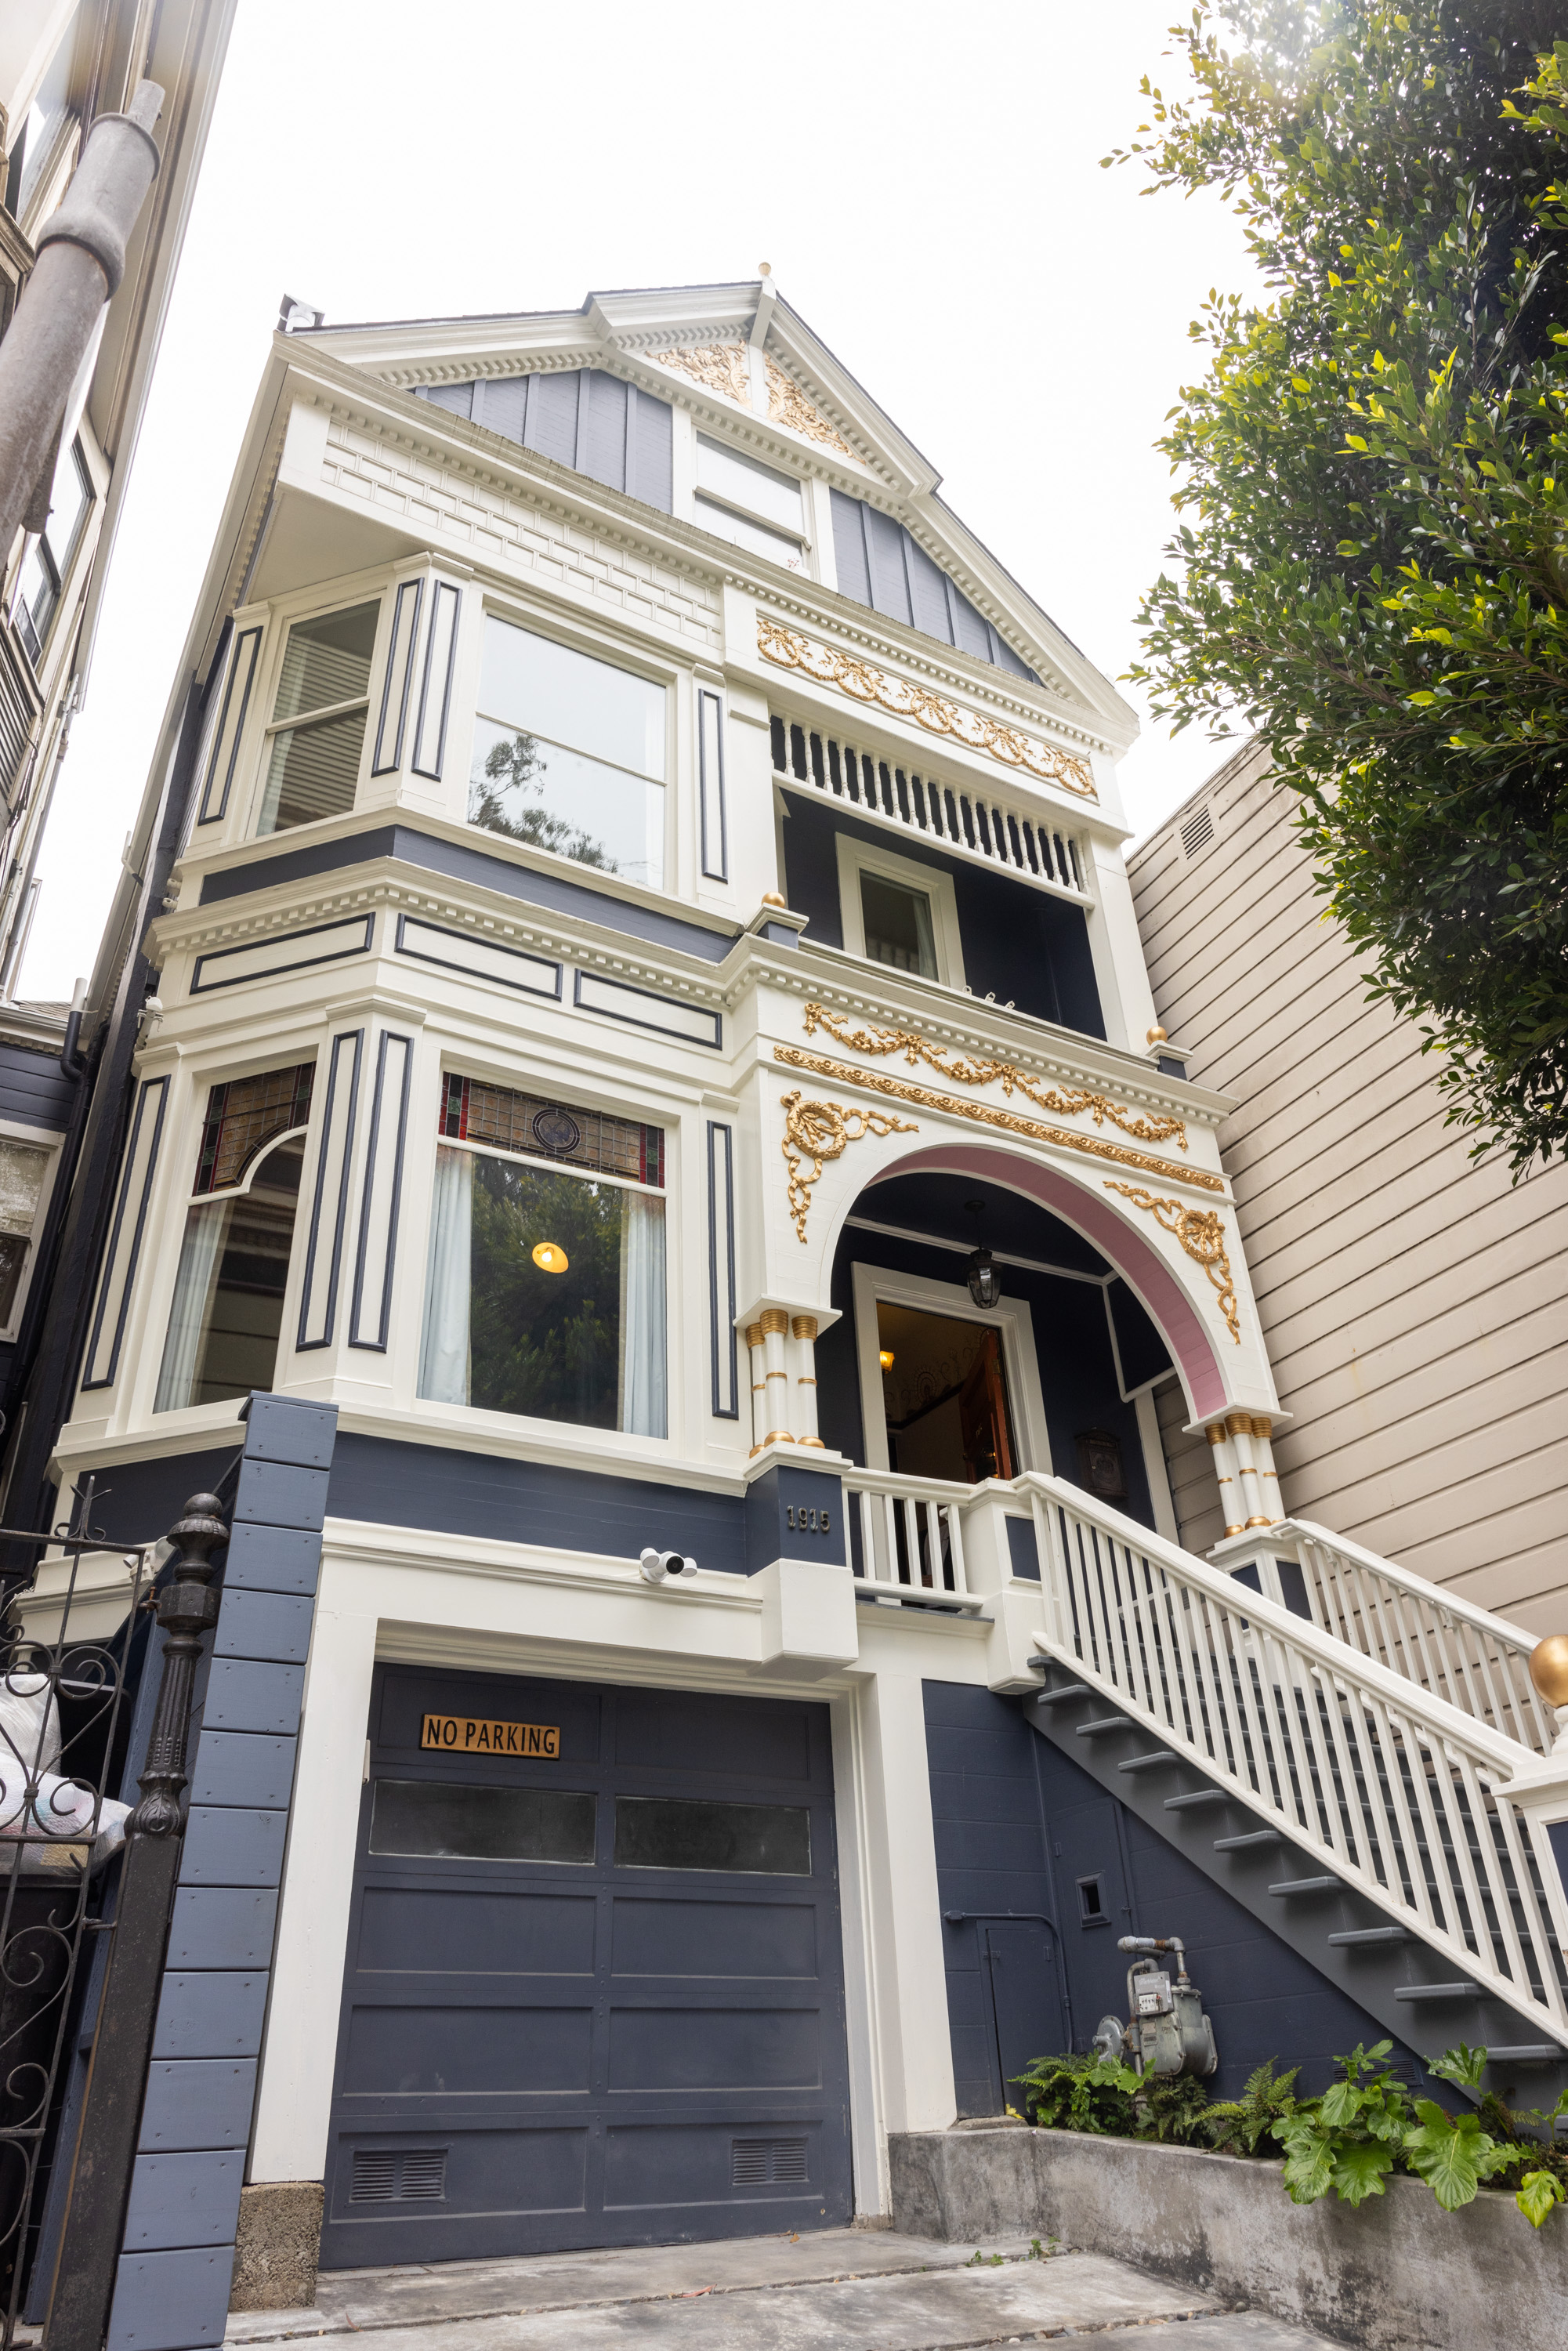 The image shows a multi-story Victorian-style house with ornate gold trim, a bay window, a gray garage labeled &quot;No Parking,&quot; and an external staircase.